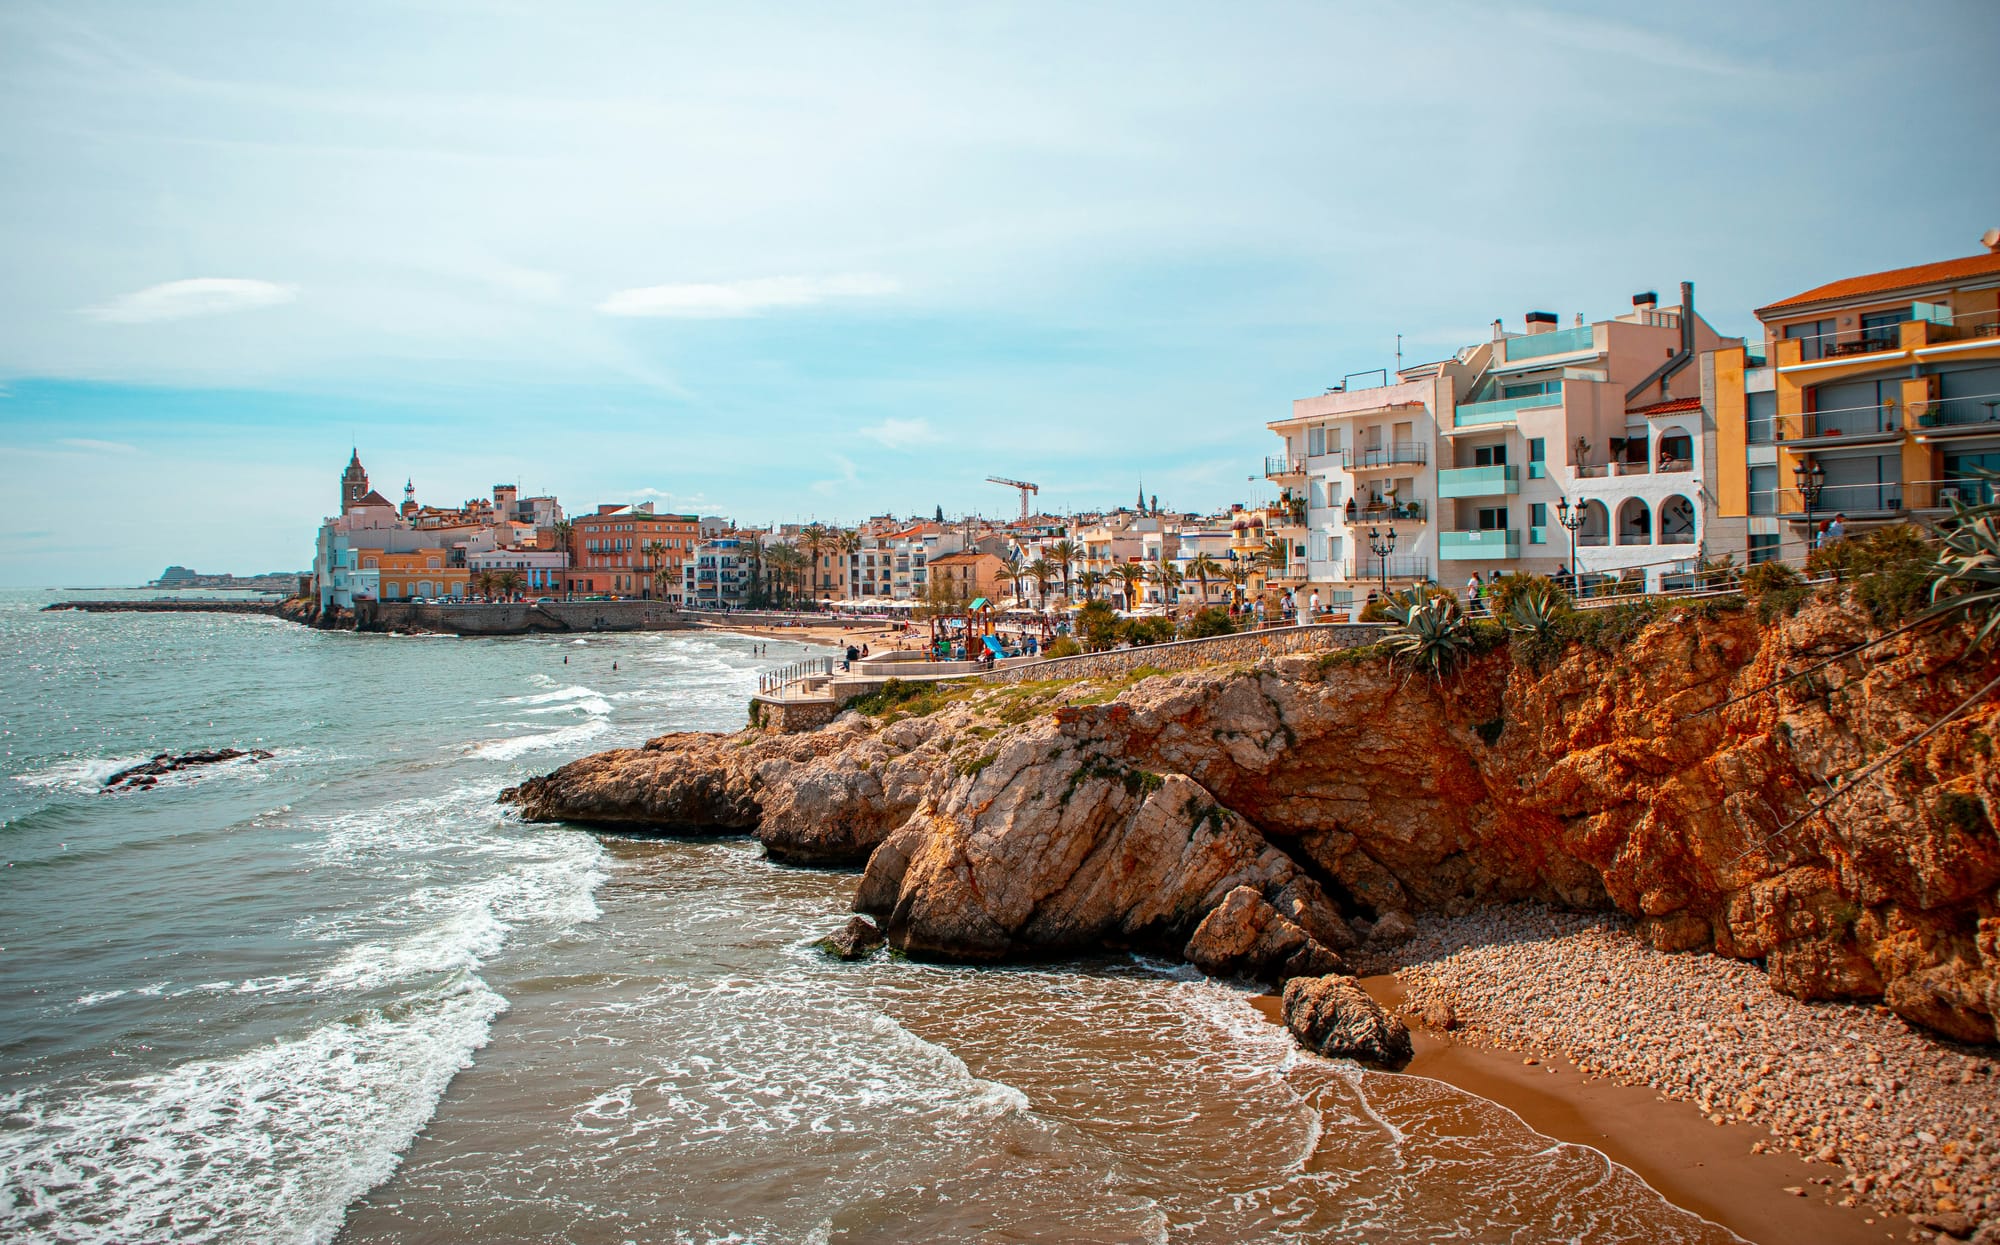 A beach and city view of Sitges